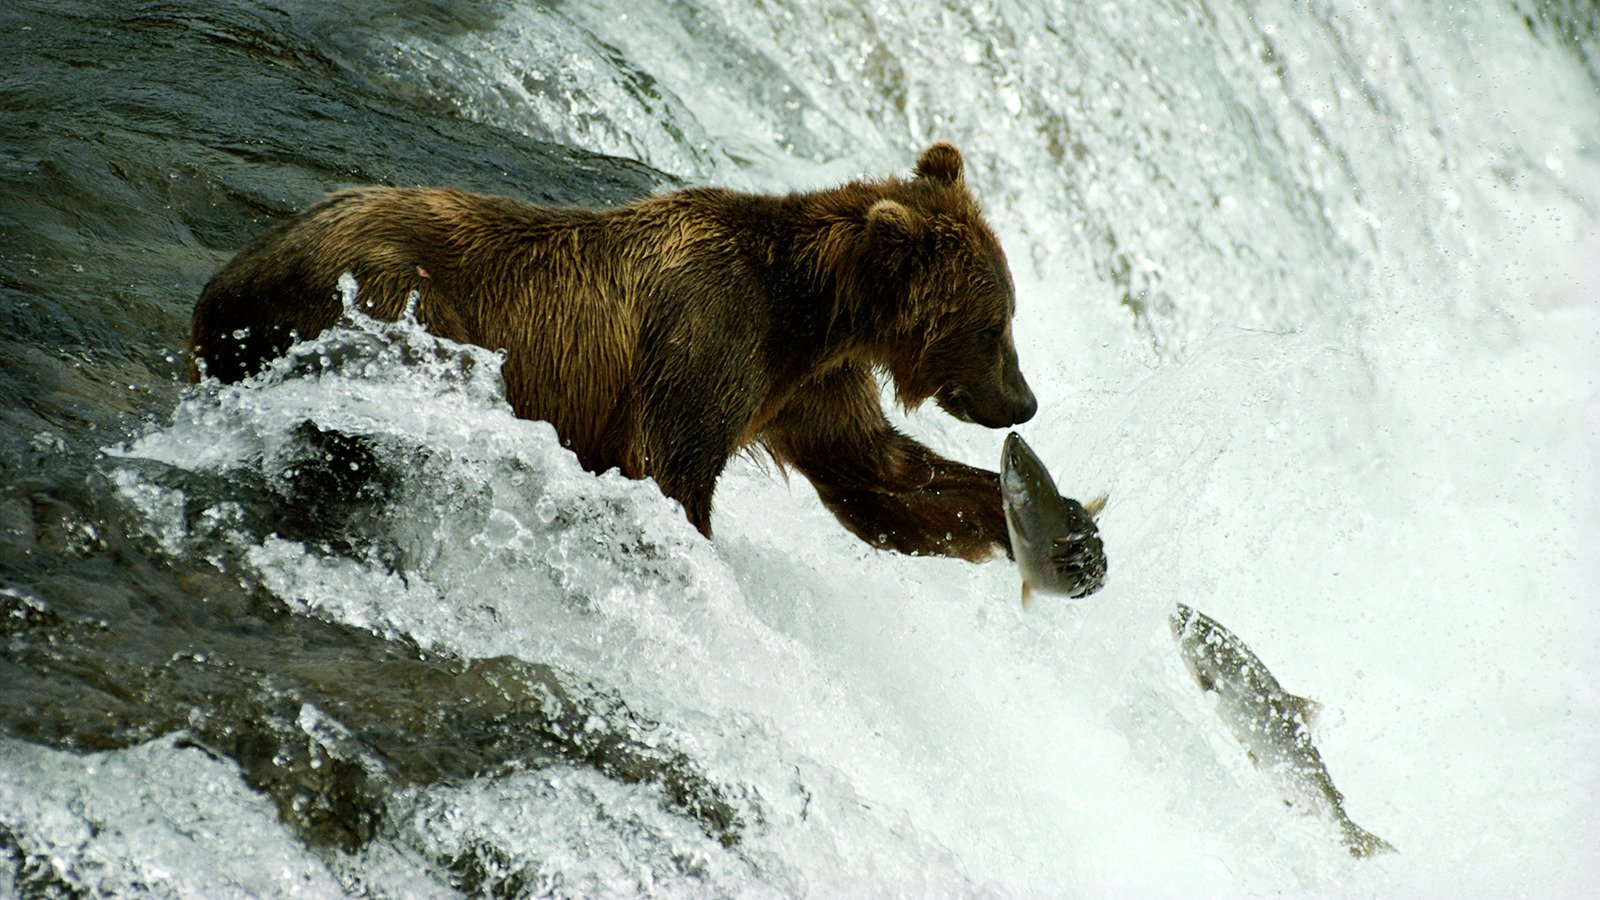 A grizzly bear eat almost 20,000 calories a day.